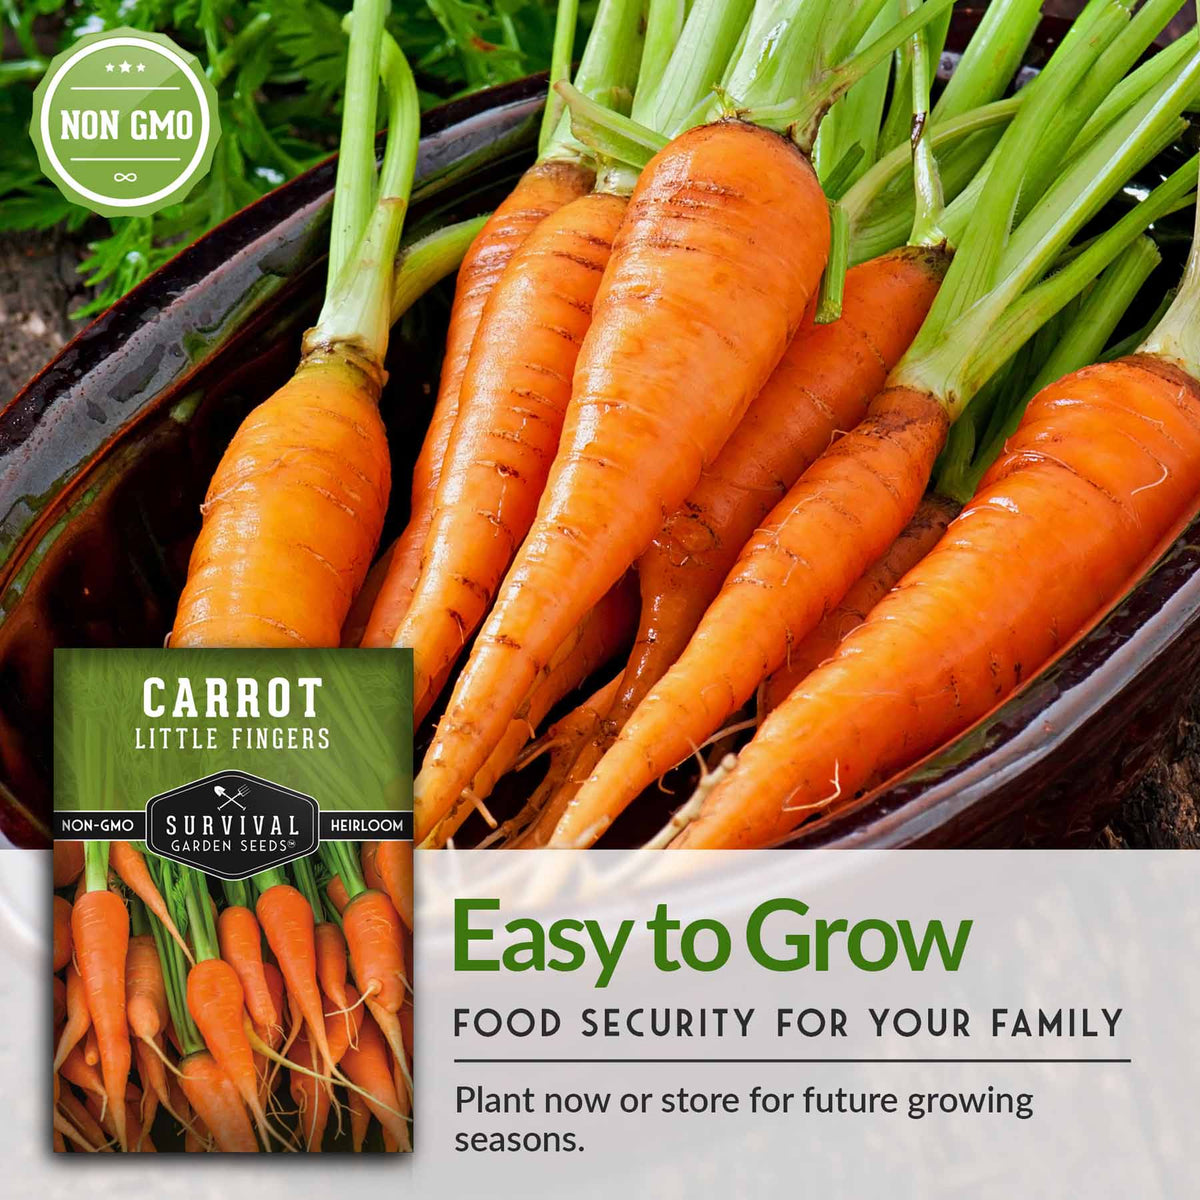 Easy to grow food security for your family